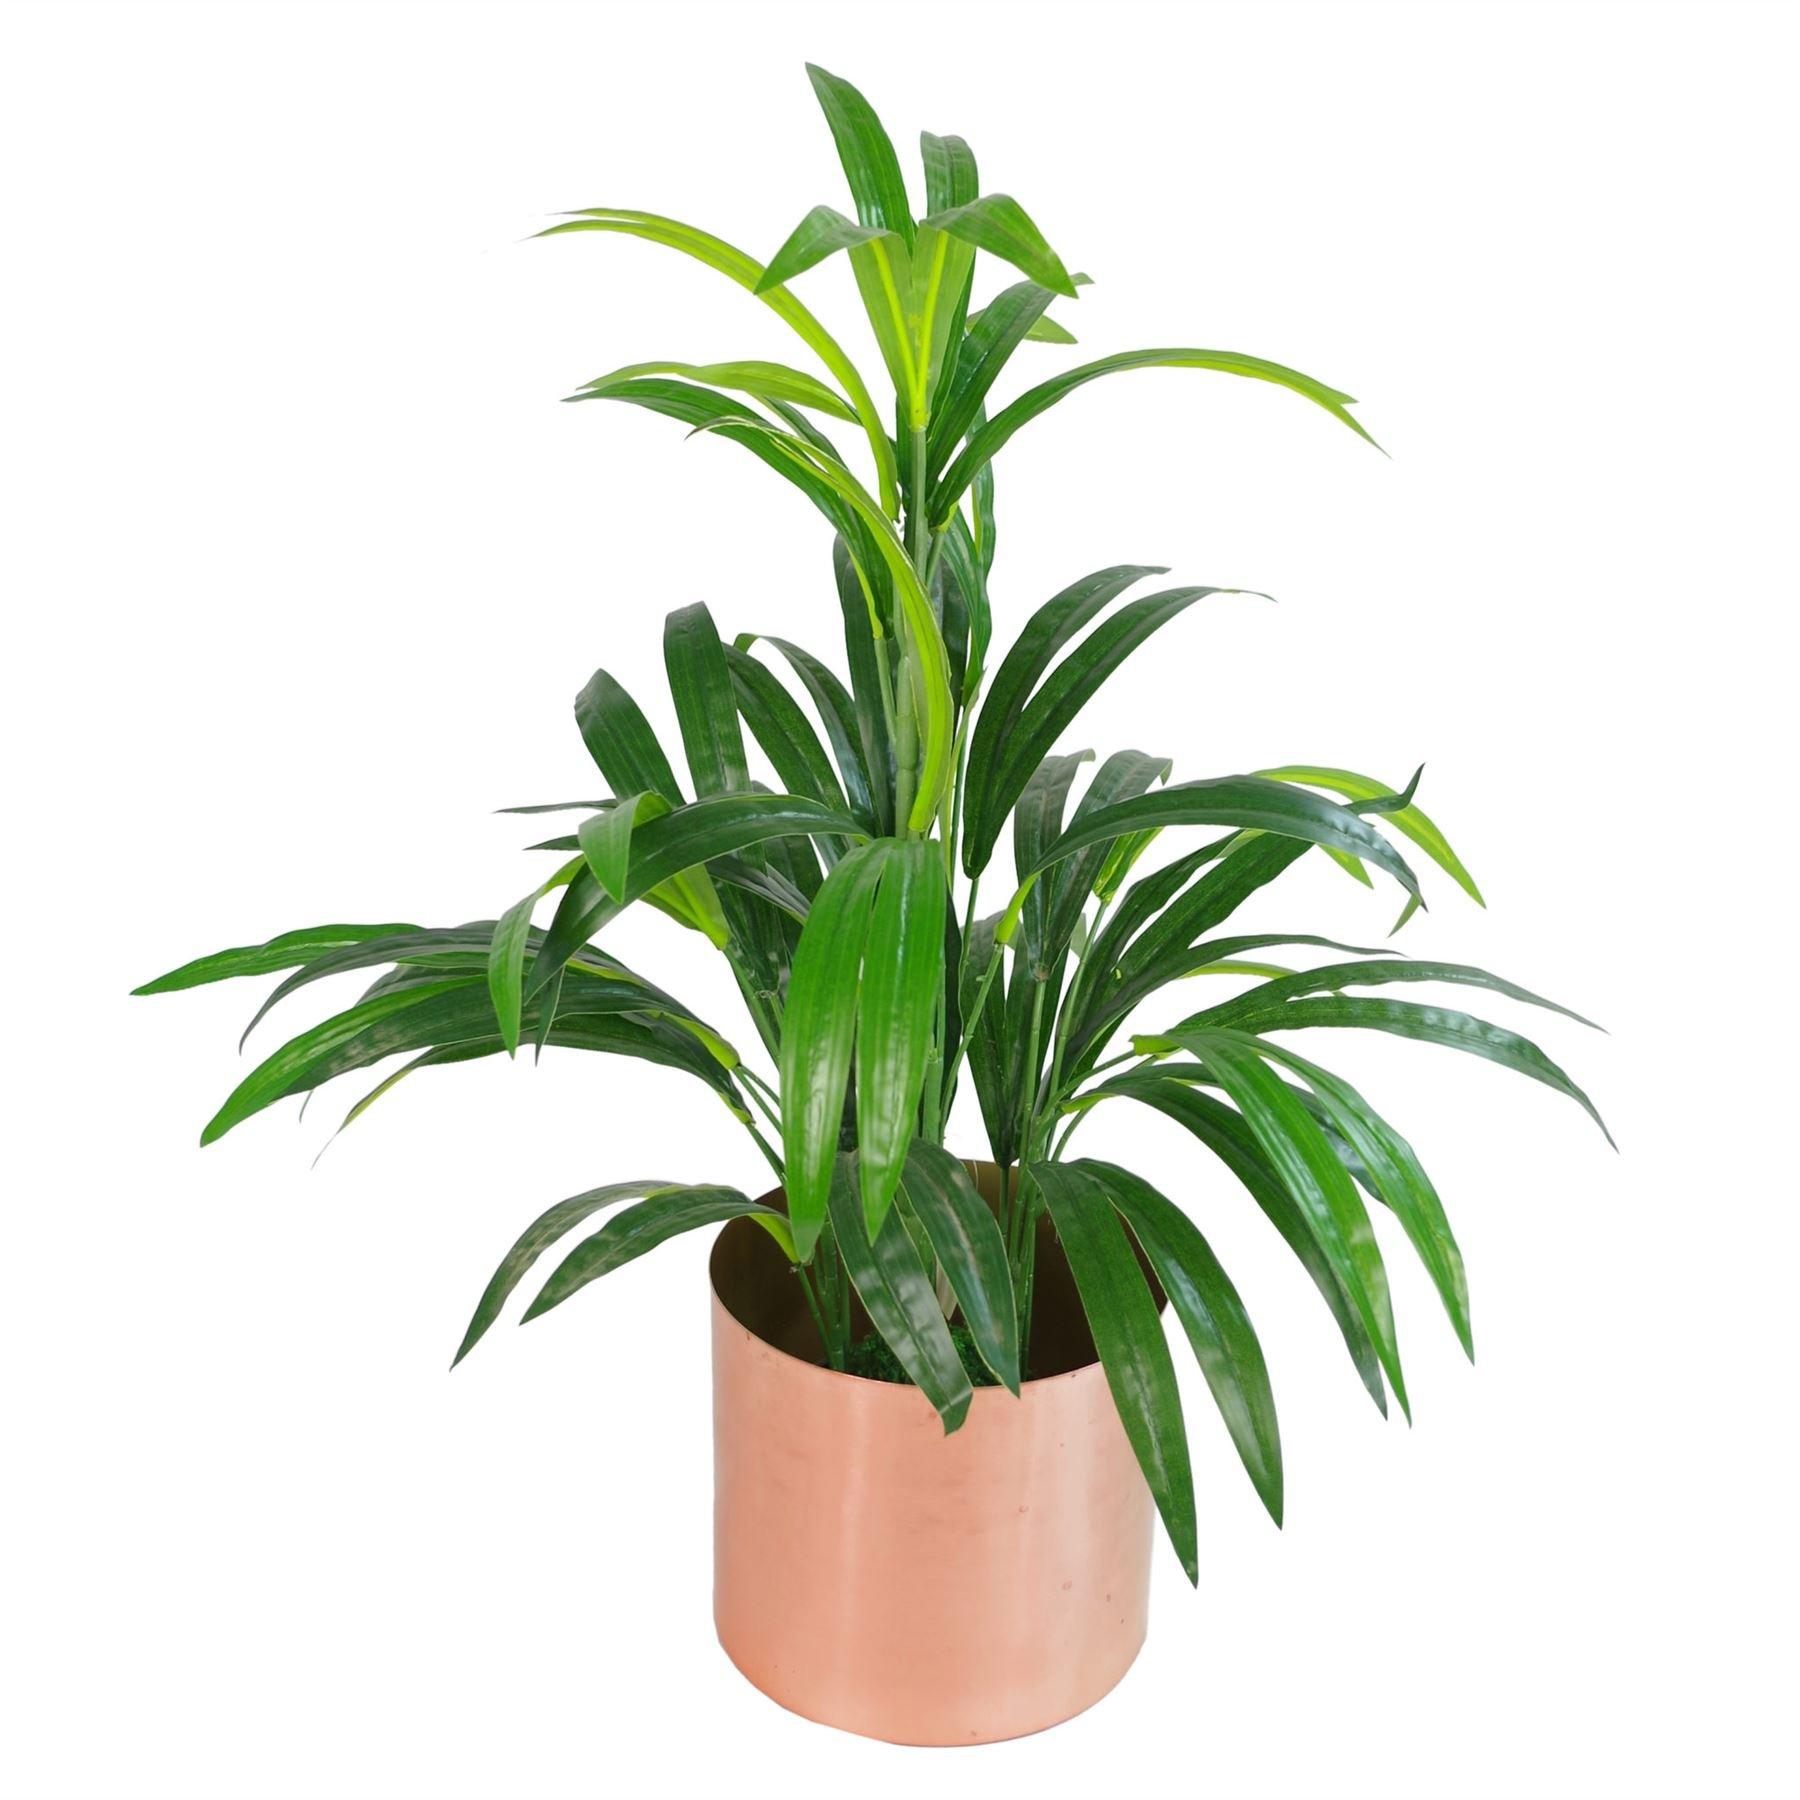 65cm Artificial Bamboo Leaf Shrub with Brushed Copper Planter